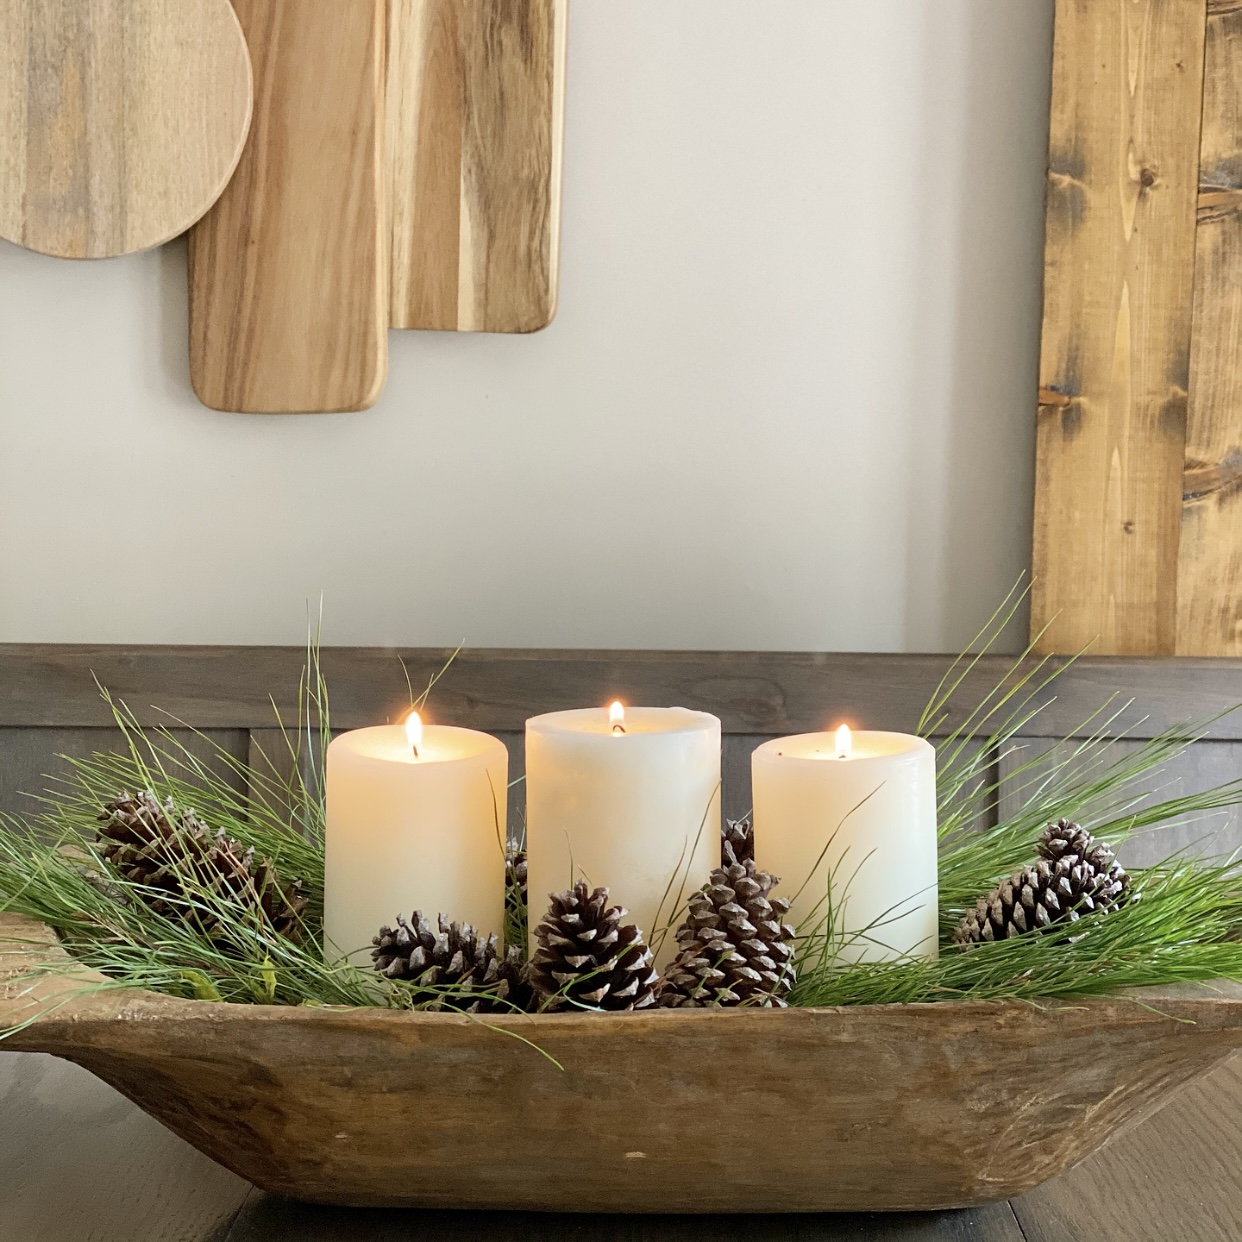 Dough bowl centerpiece with winter greens, pinecones, and candles.